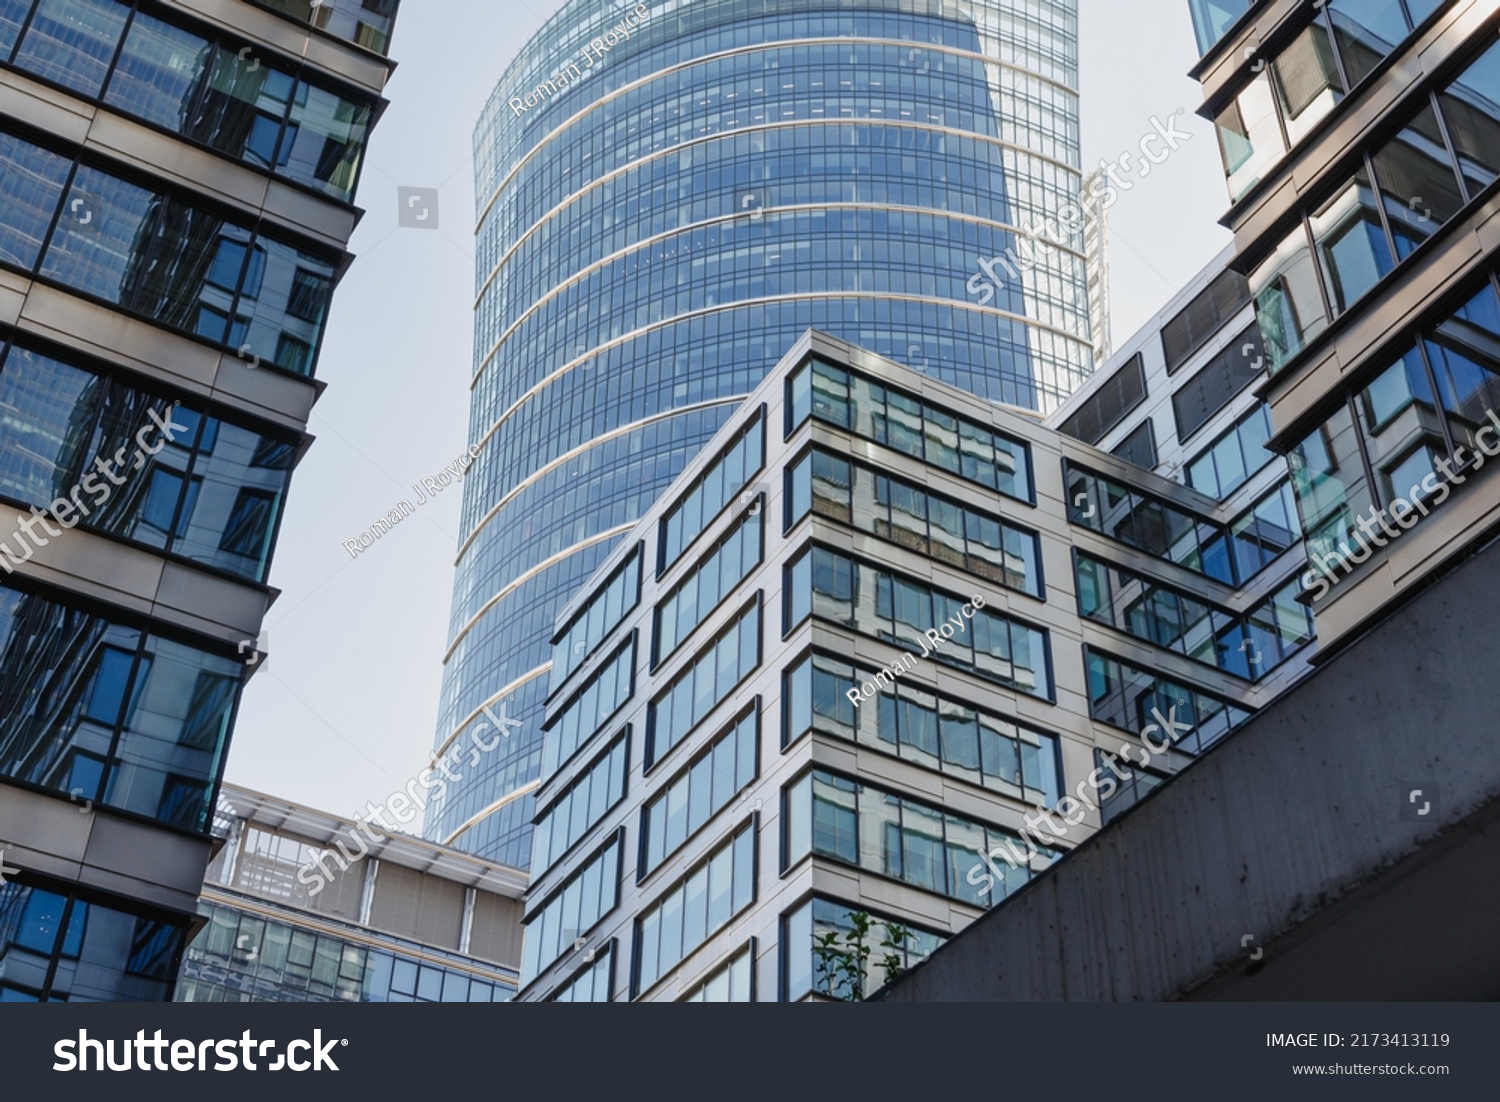 The view of the close constructed modern office buildings in the financial district. Glass towers in downtown of the city. A cluster of tall buildings. #2173413119